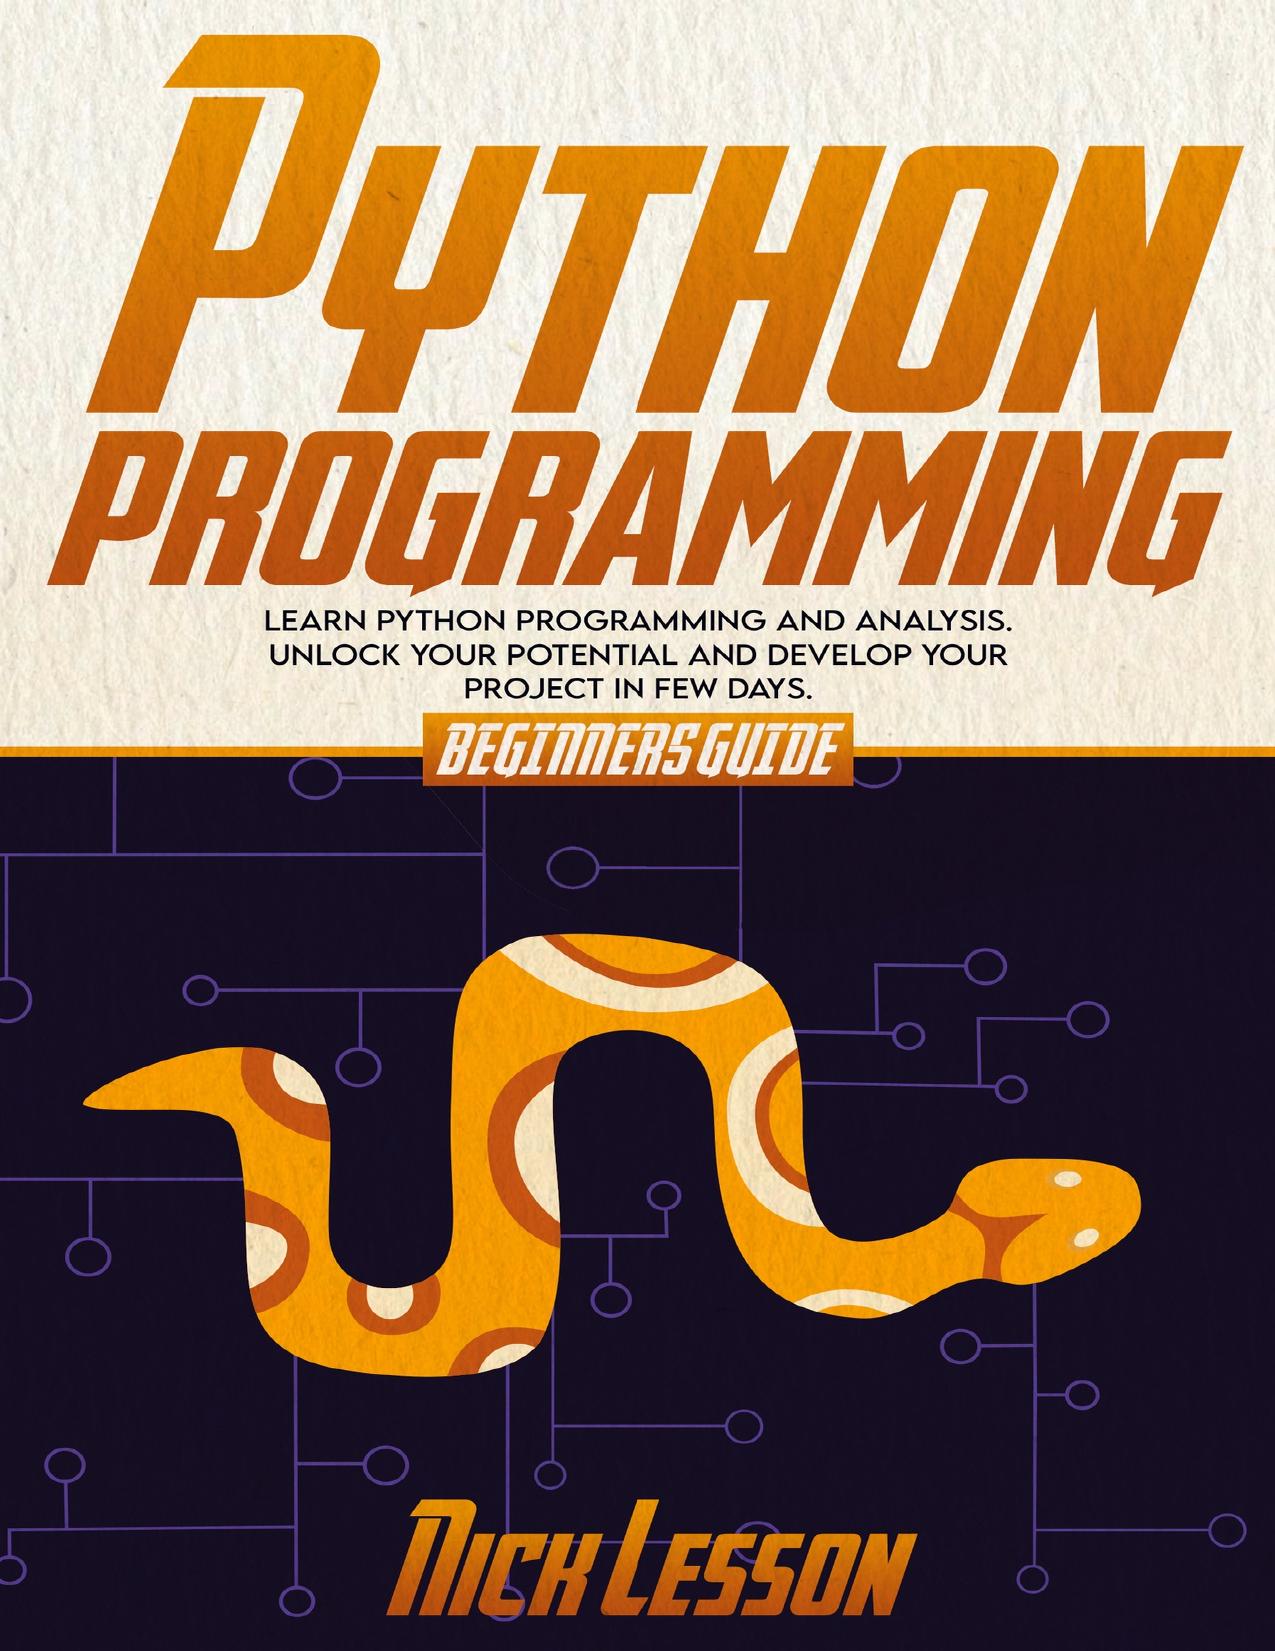 Python Programming Beginners Guide To Learn Python Programming And Analysis Unlock Your